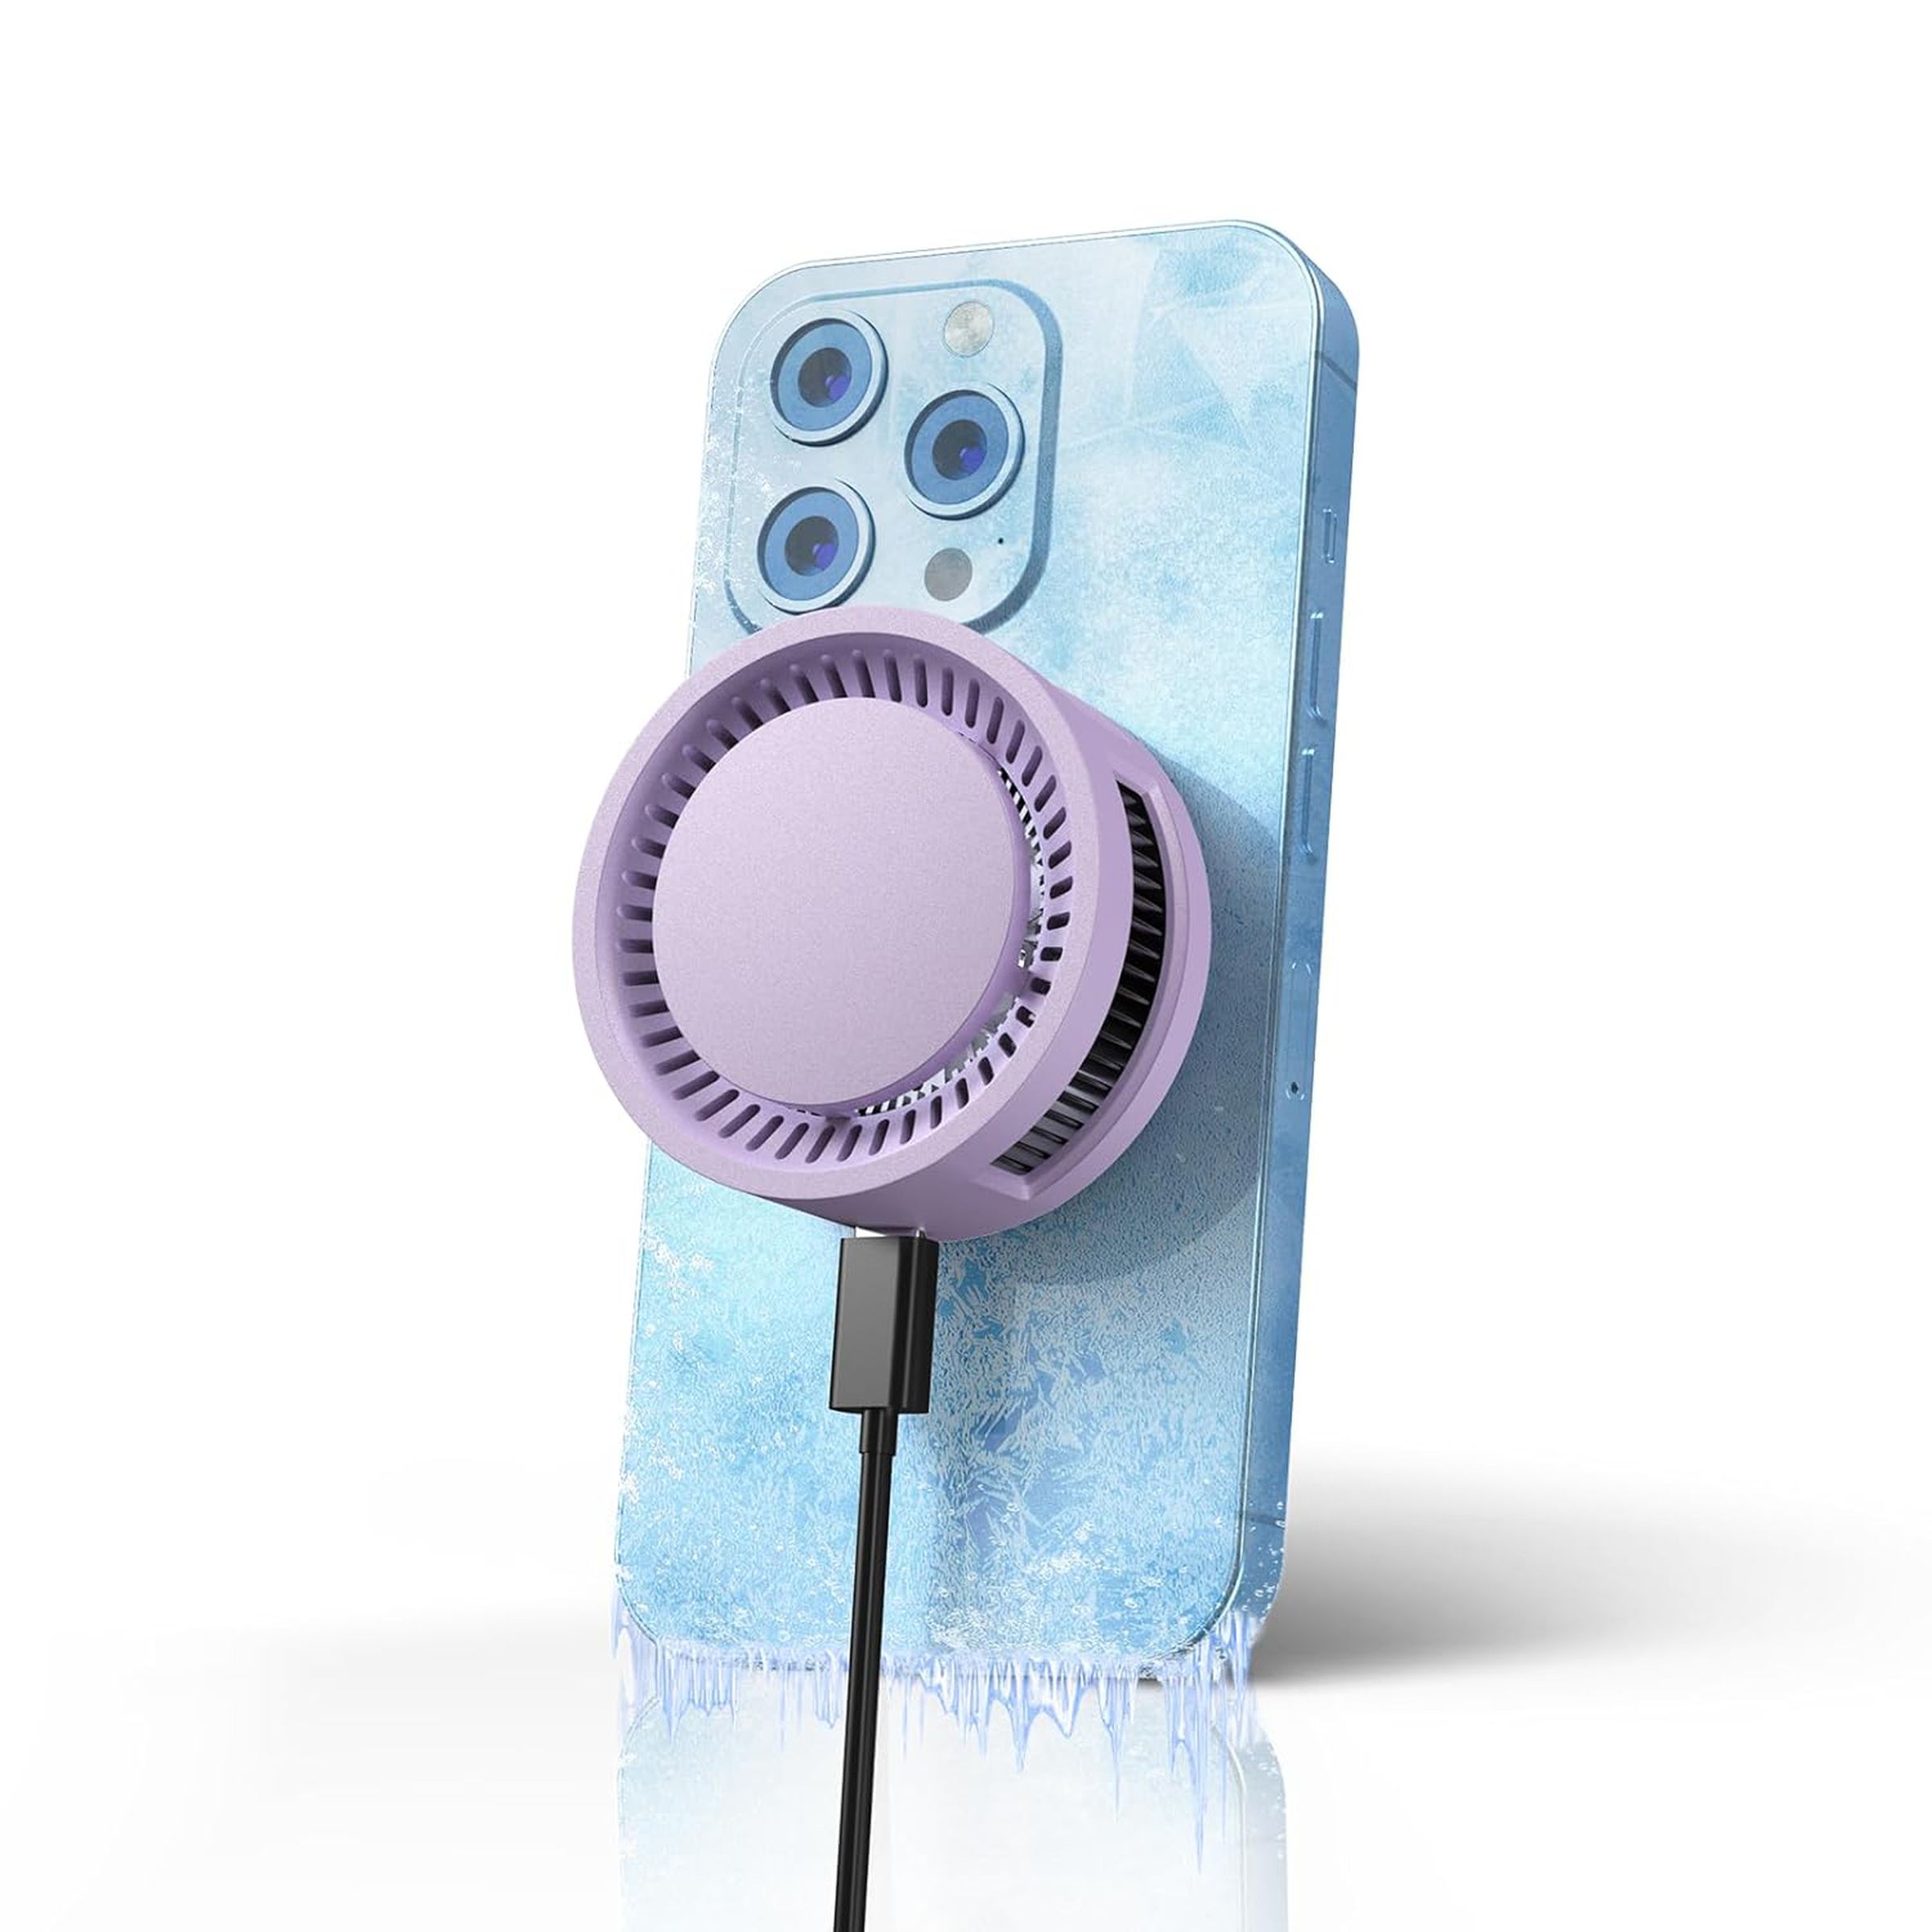 An iPhone-like phone with a purple fan attached, plugged into power. The phone sits upright and has some frost on it, with some icicles forming on the bottom.